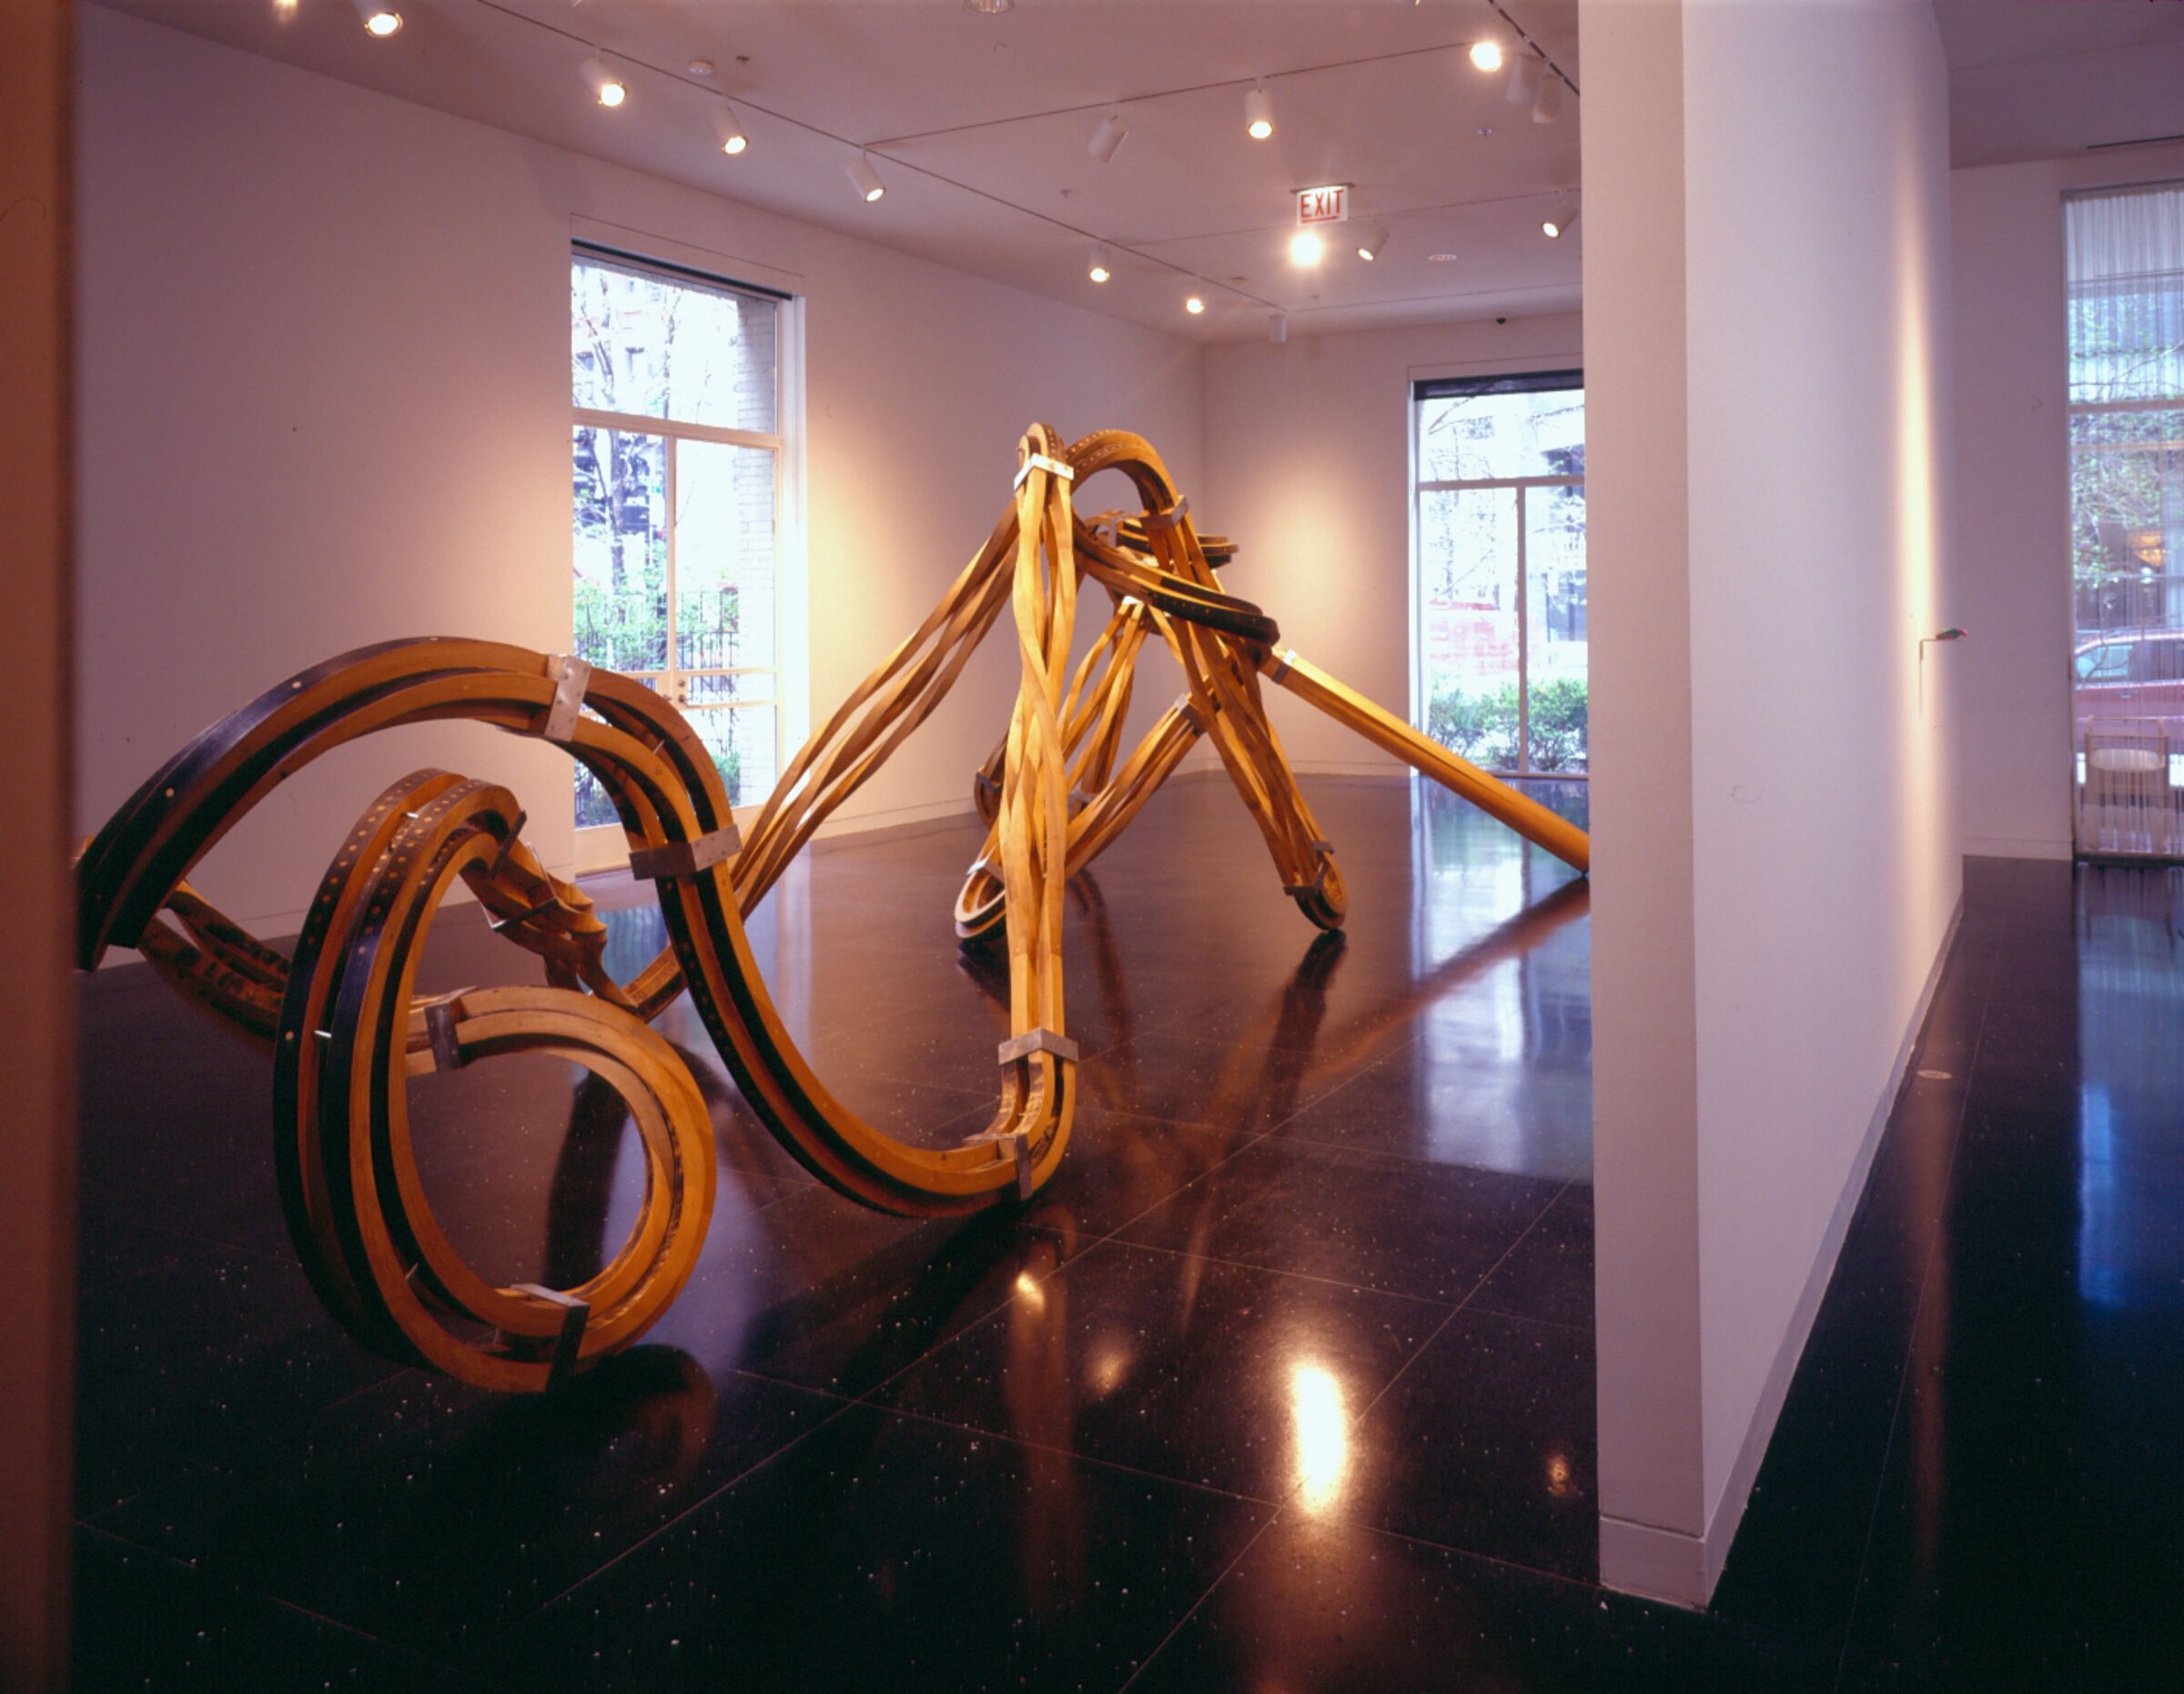 A large, tendril-like bronze sculpture occupies the majority of a white gallery space next to a freestanding wall.